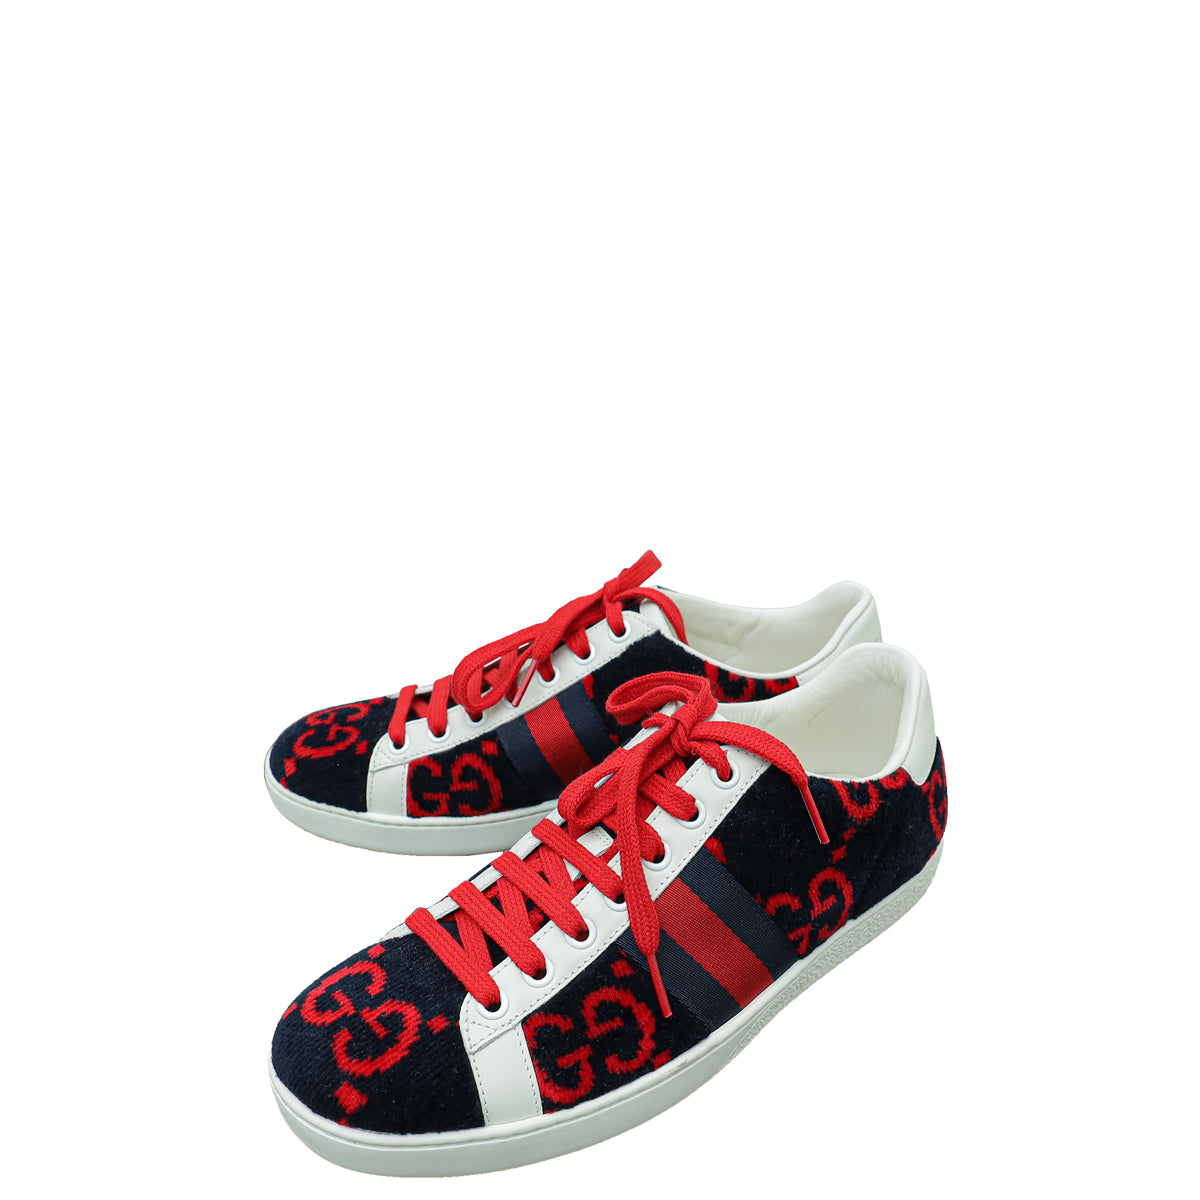 Gucci Bicolor GG Terry Cloth Web Ace Sneakers 36.5